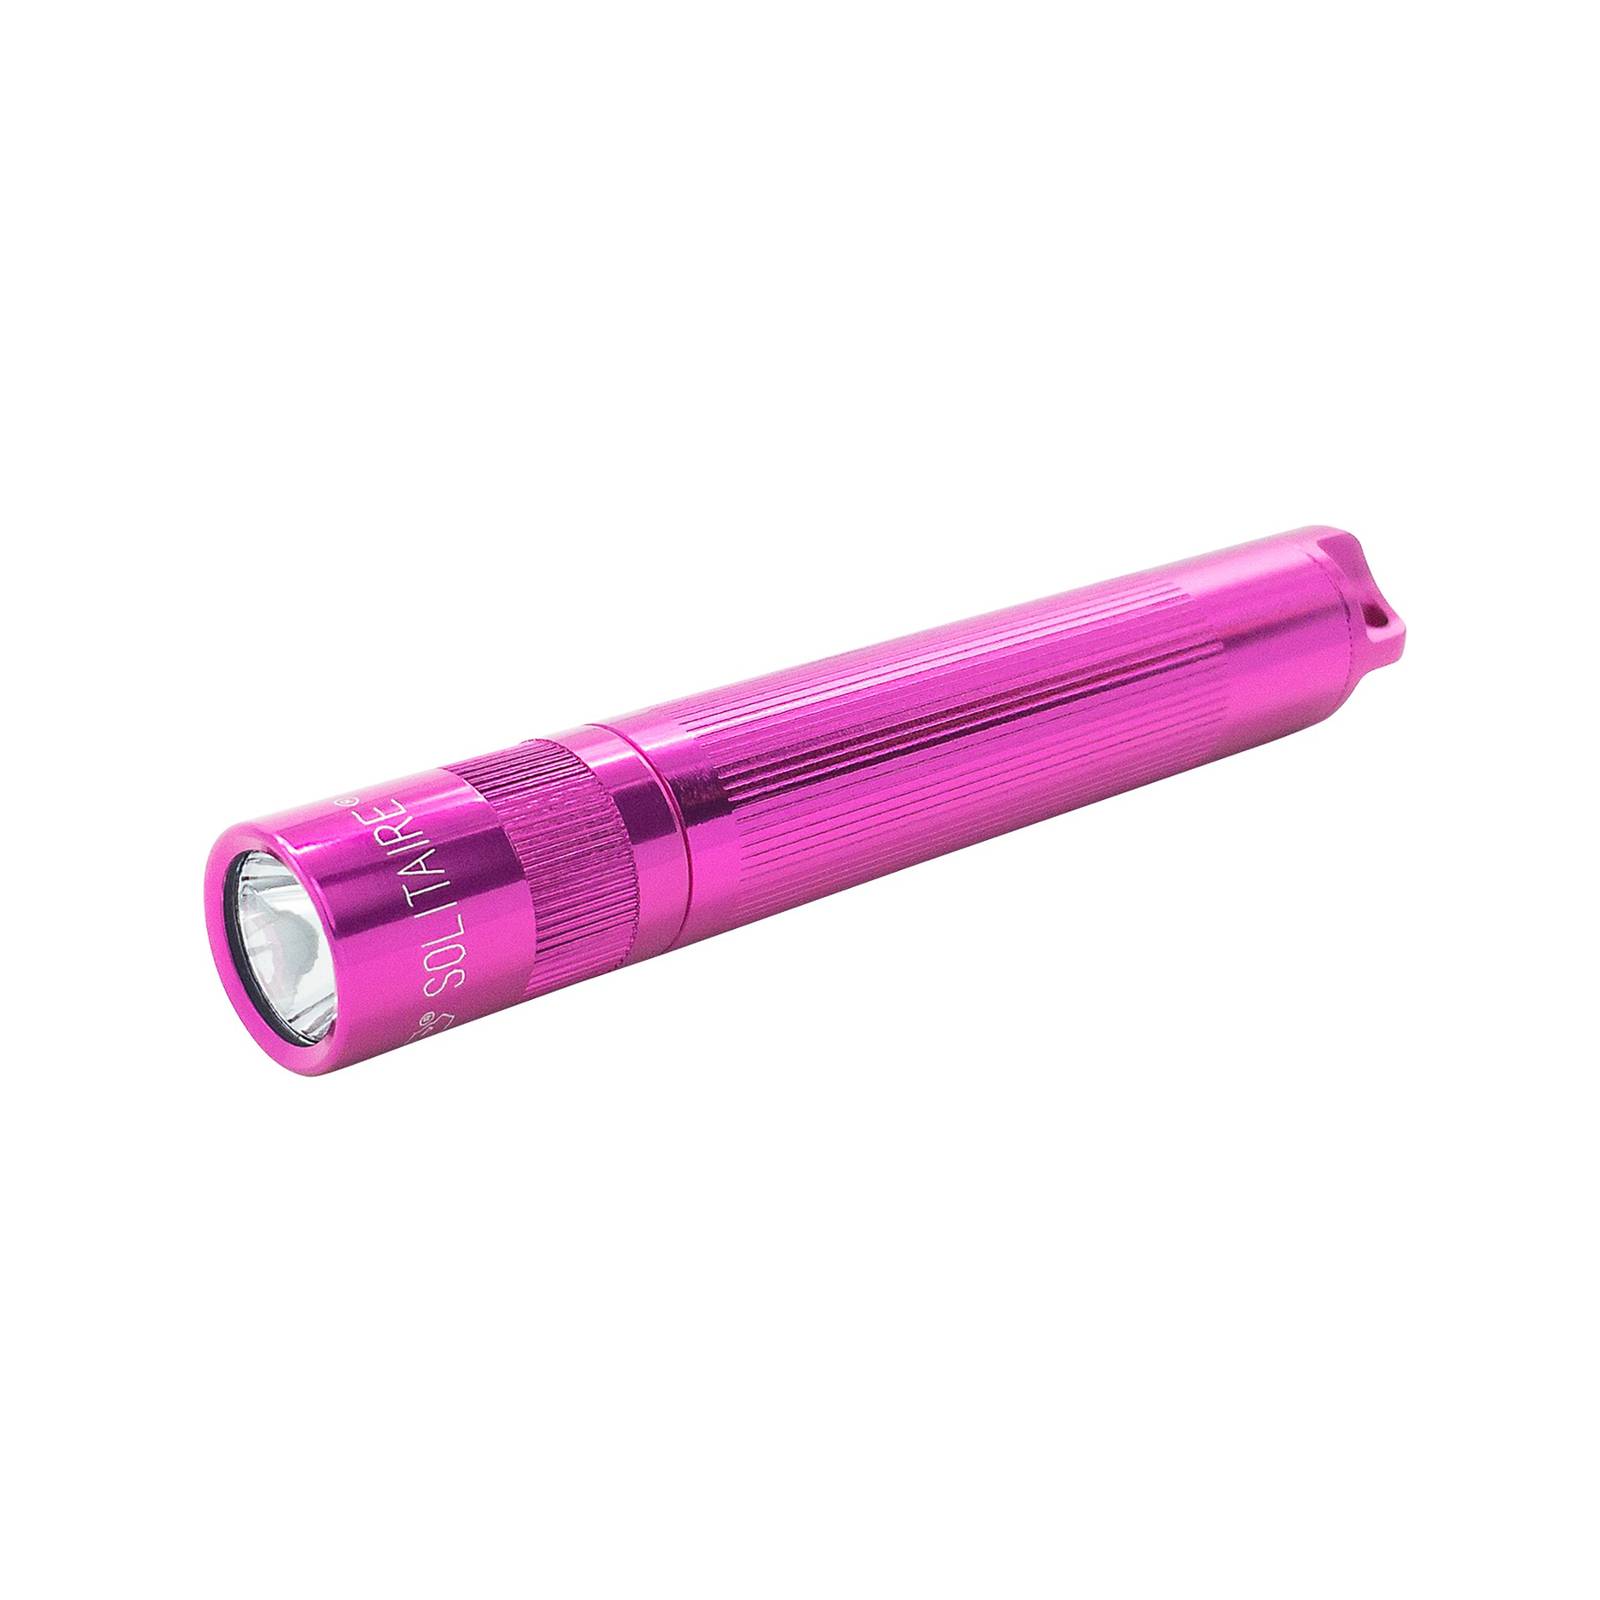 maglite lampe de poche led solitaire, 1-cell aaa, rose